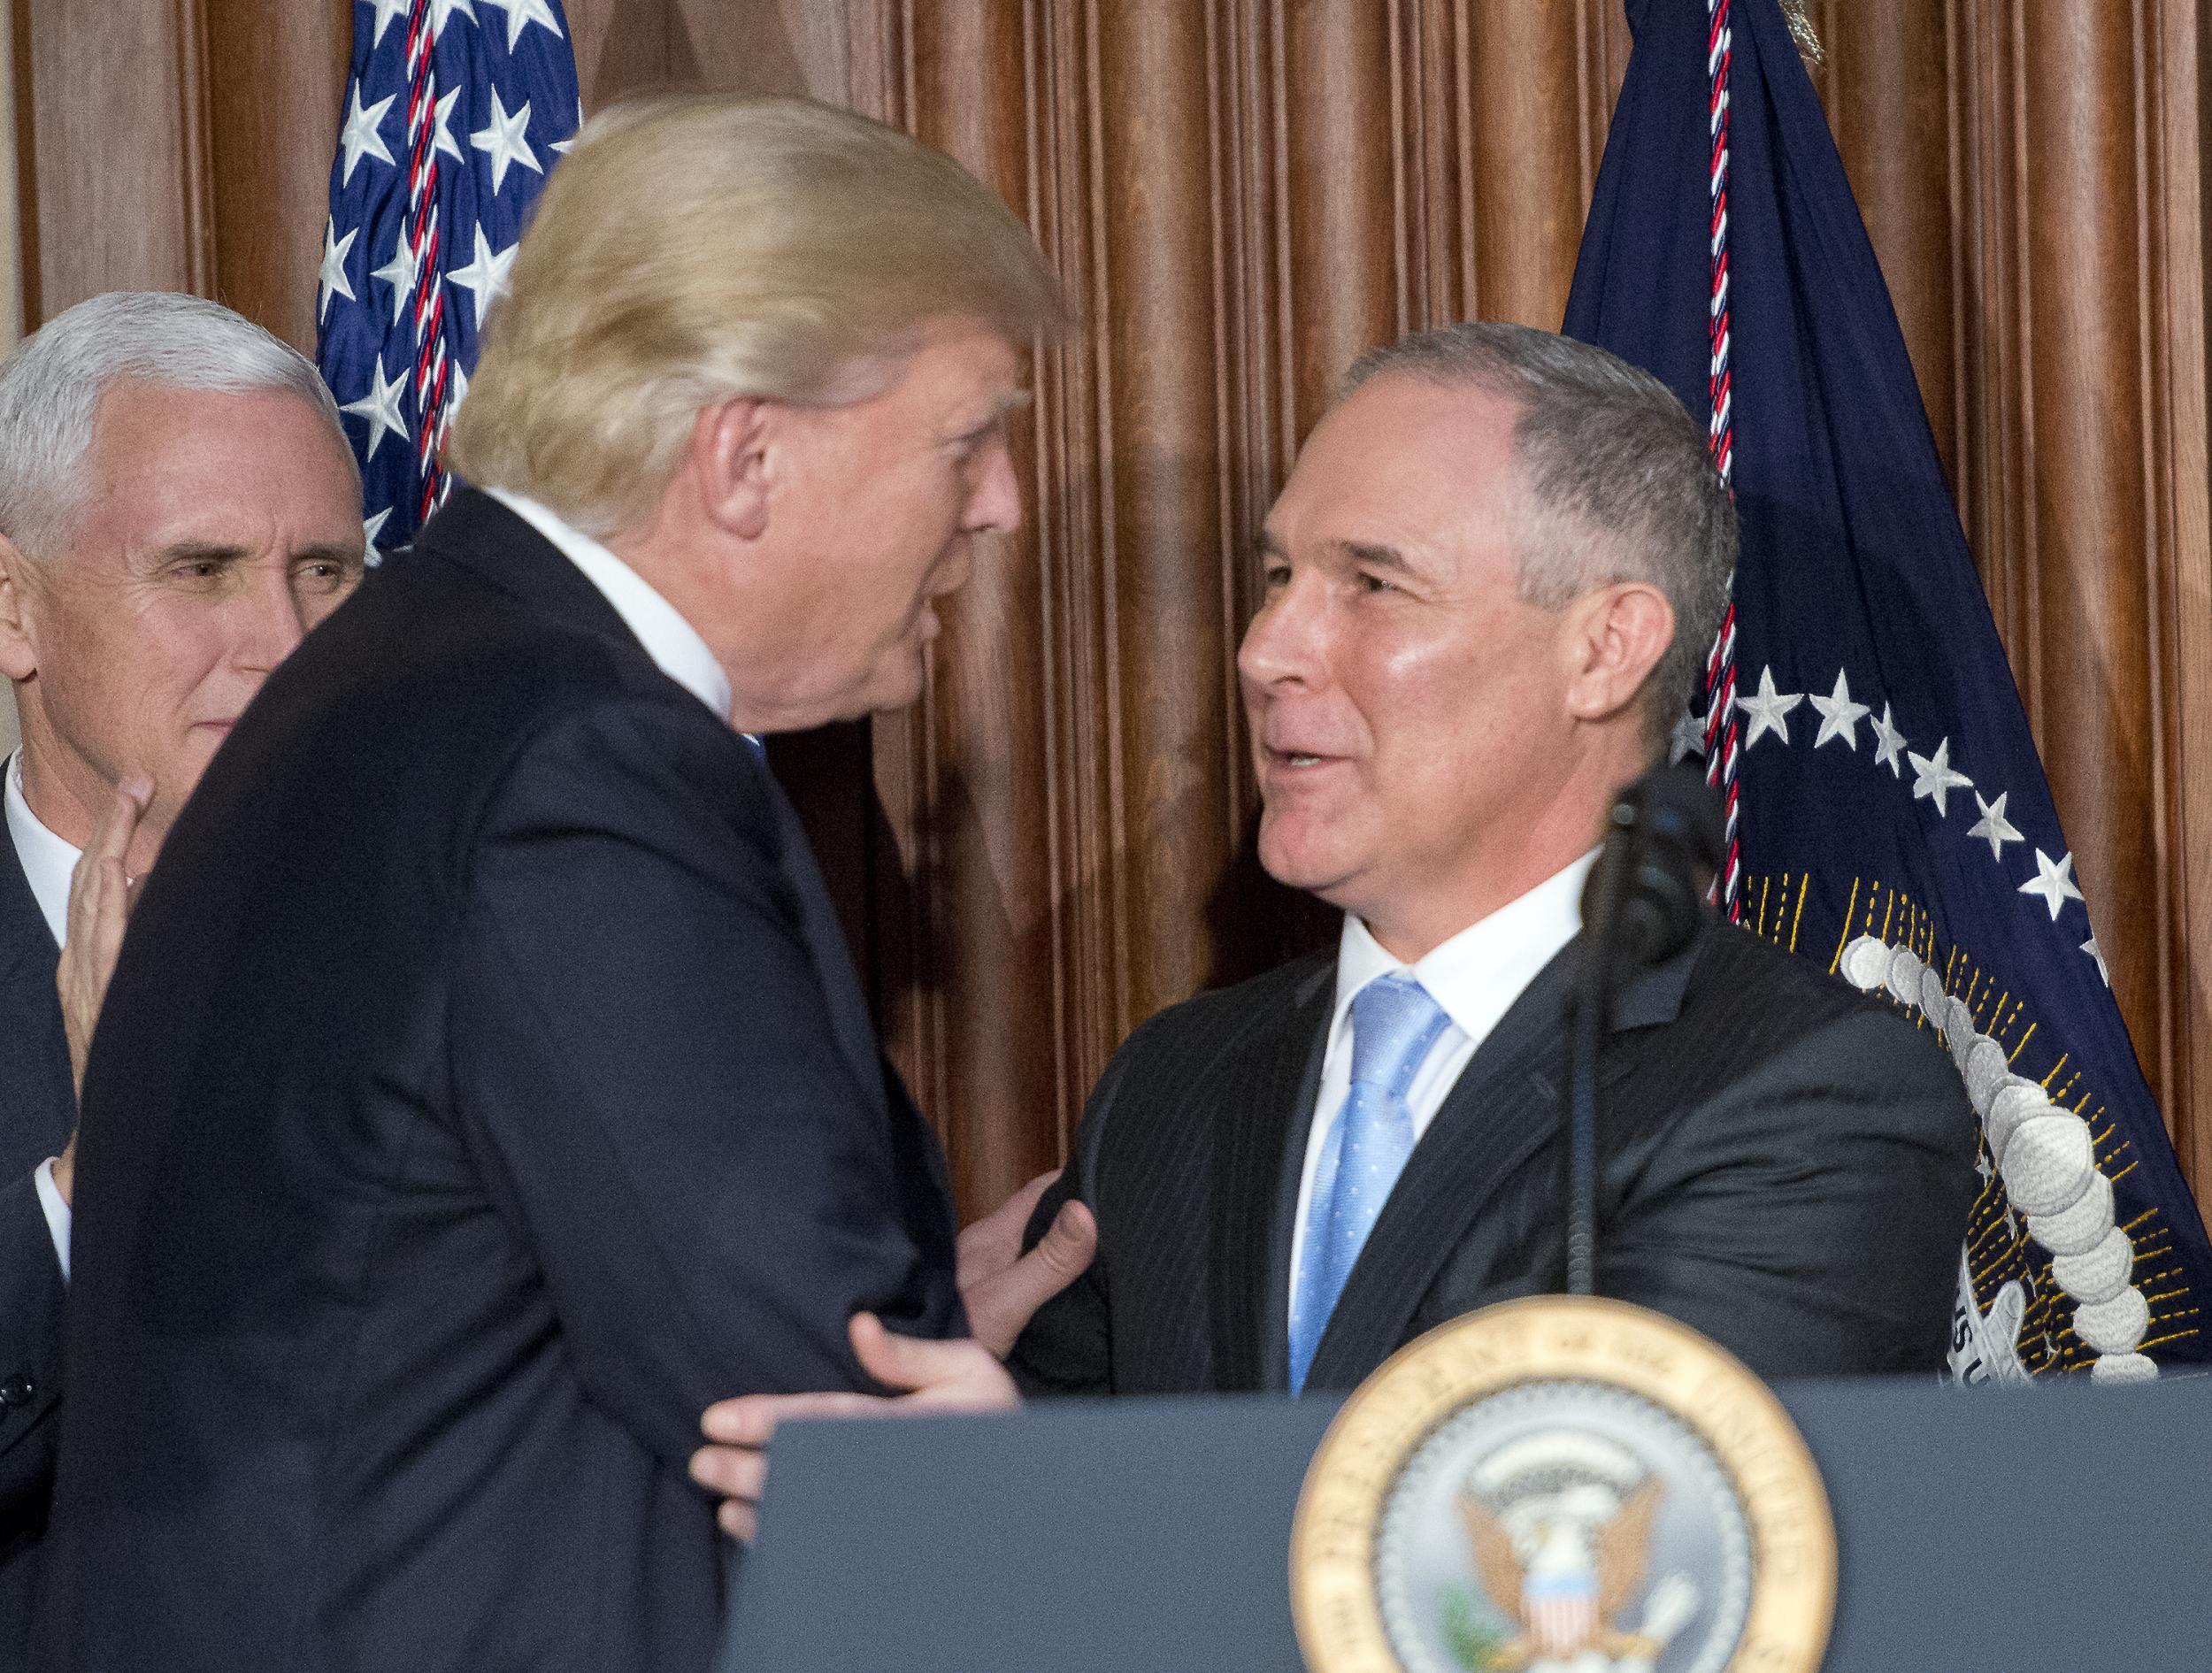 Donald Trump with Scott Pruitt, administrator of the Environmental Protection Agency